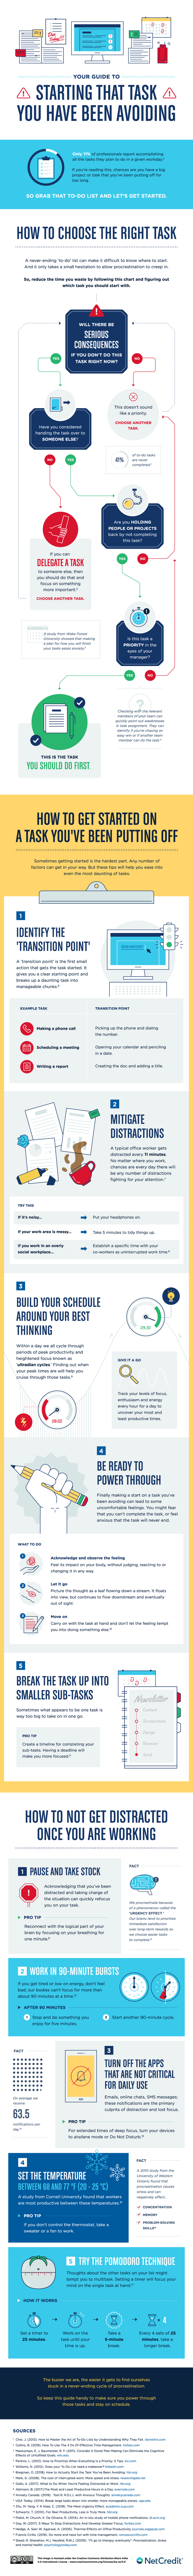 This infographic visualizes how to beat procrastination and get on with tasks you’ve been avoiding